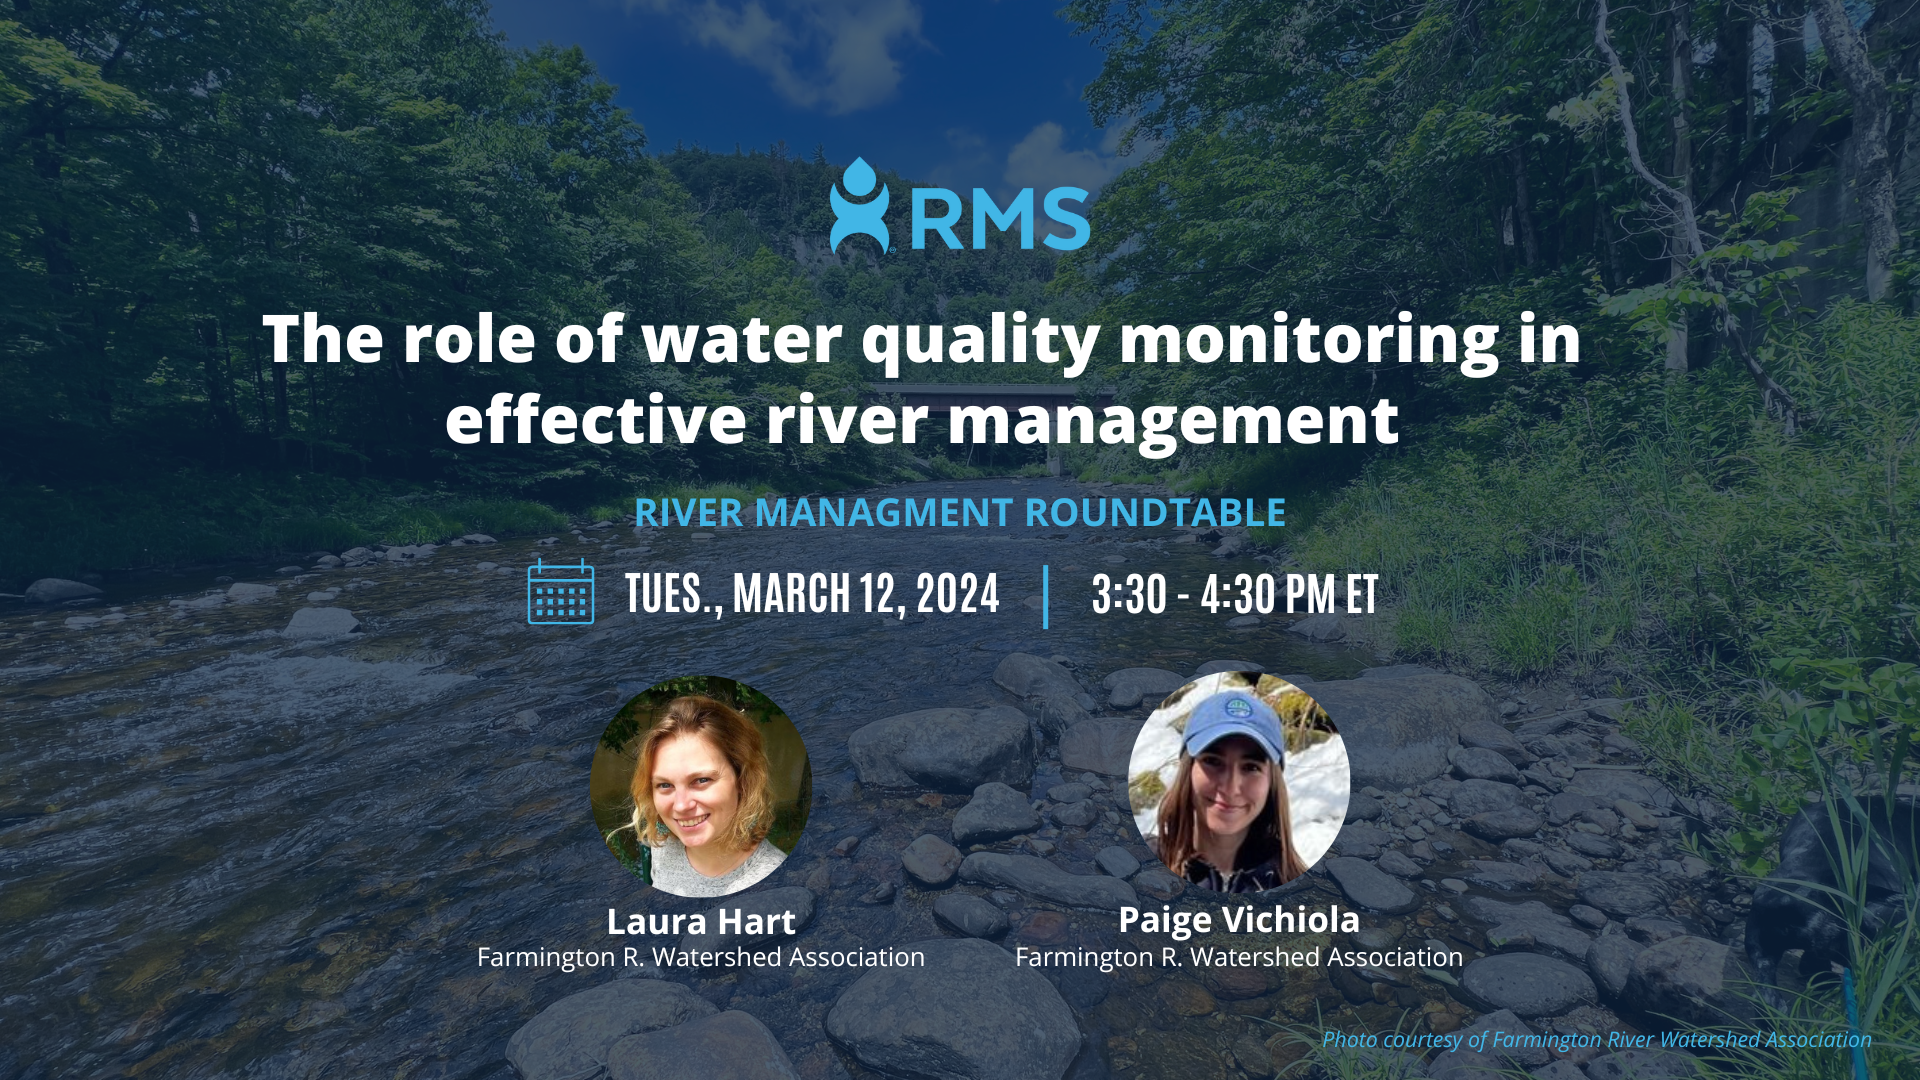 The role of water quality monitoring in effective river management